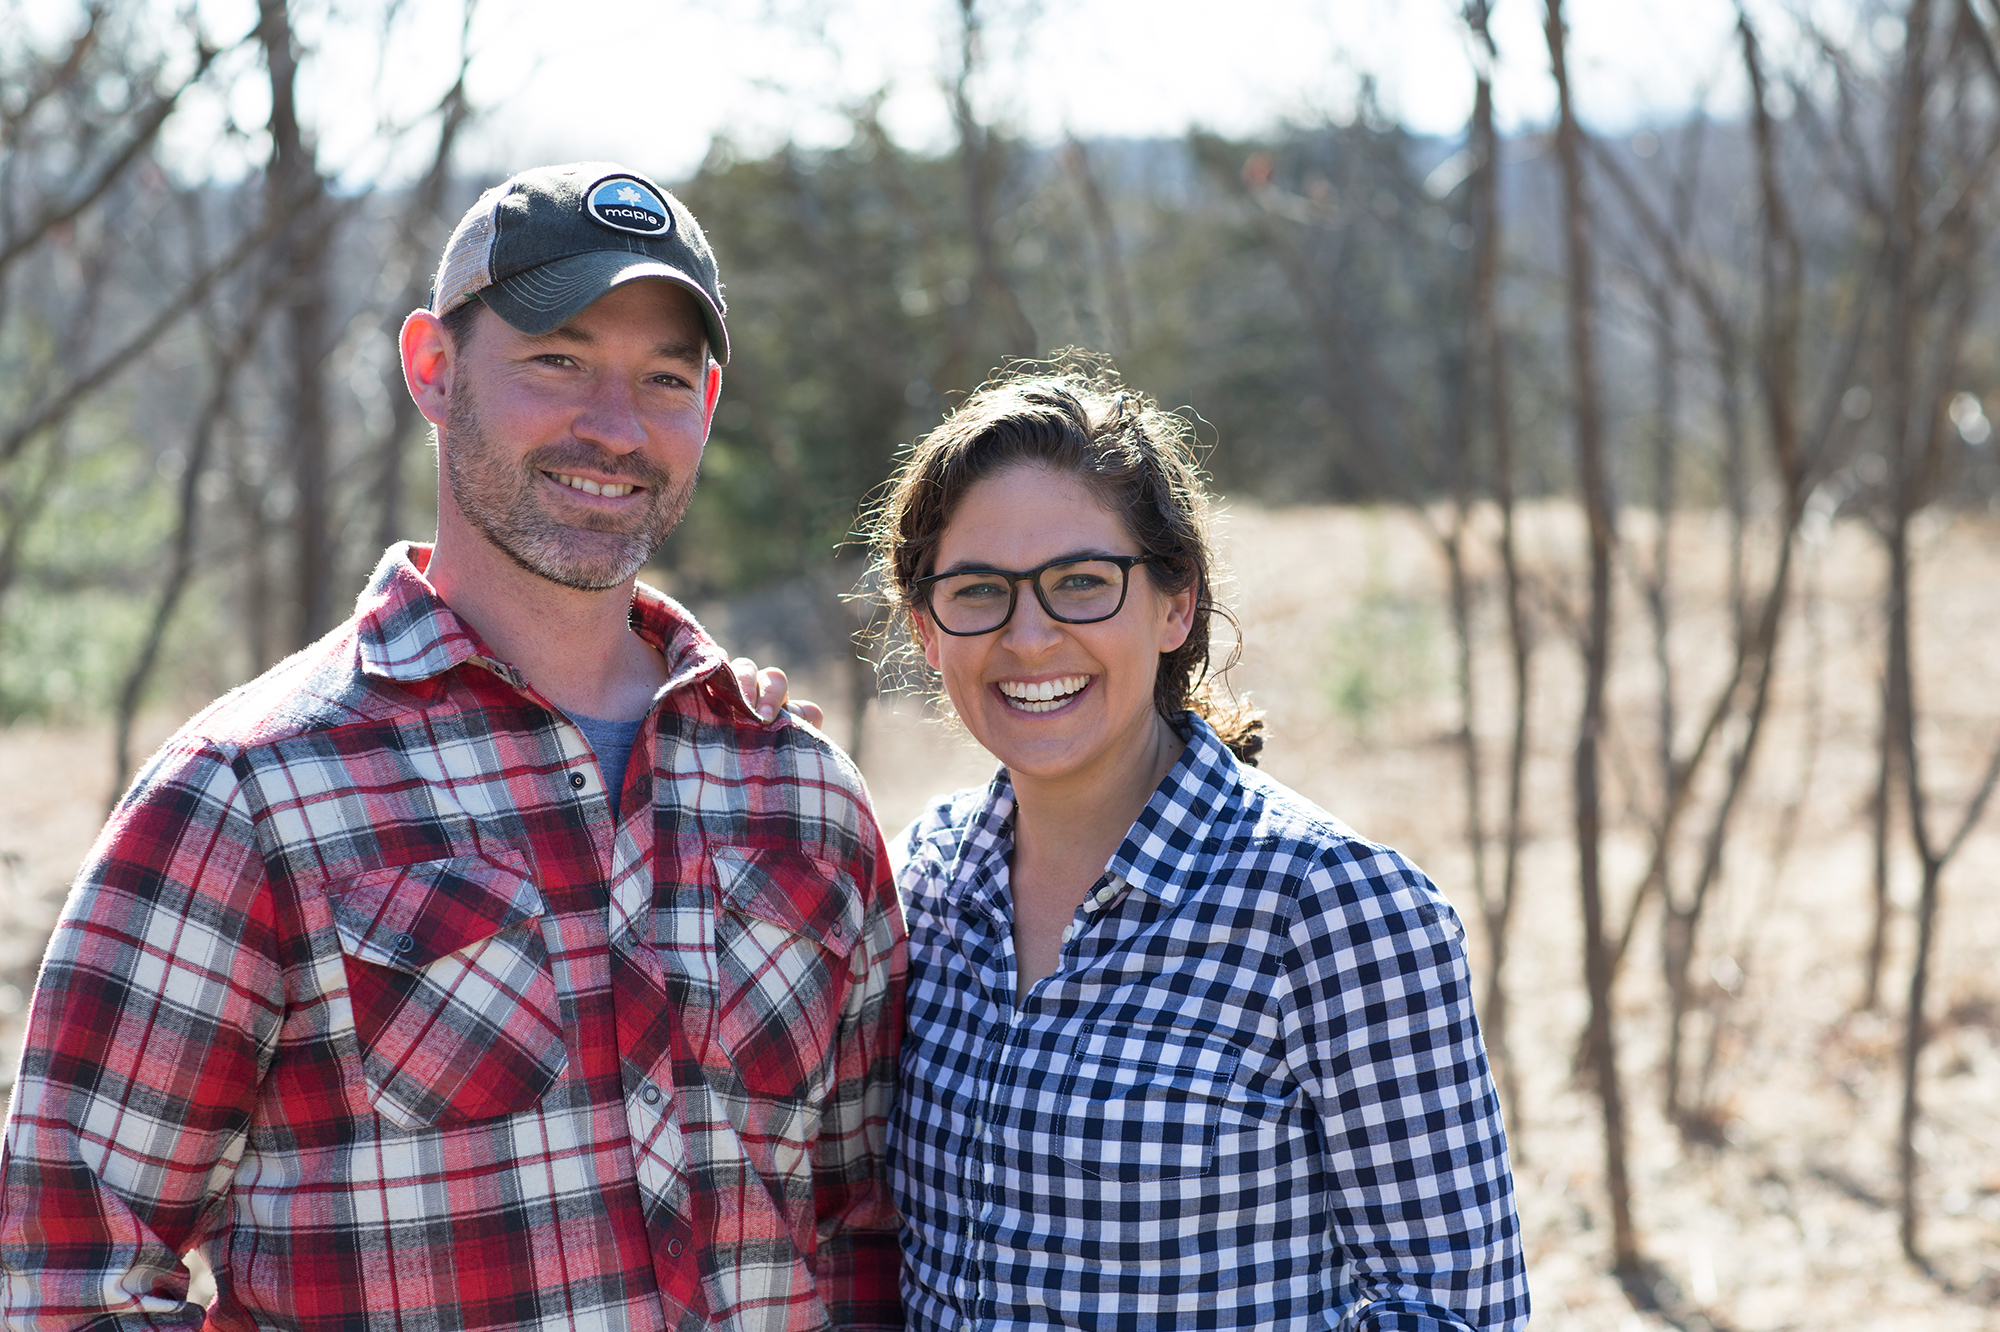 Kate Weiler and Jeff Rose co-founded Drinkmaple. "People have been drinking maple water from buckets on sap farms for hundreds of years," Weiler says. "We like to say that the un-trendiest beverage is now trending."